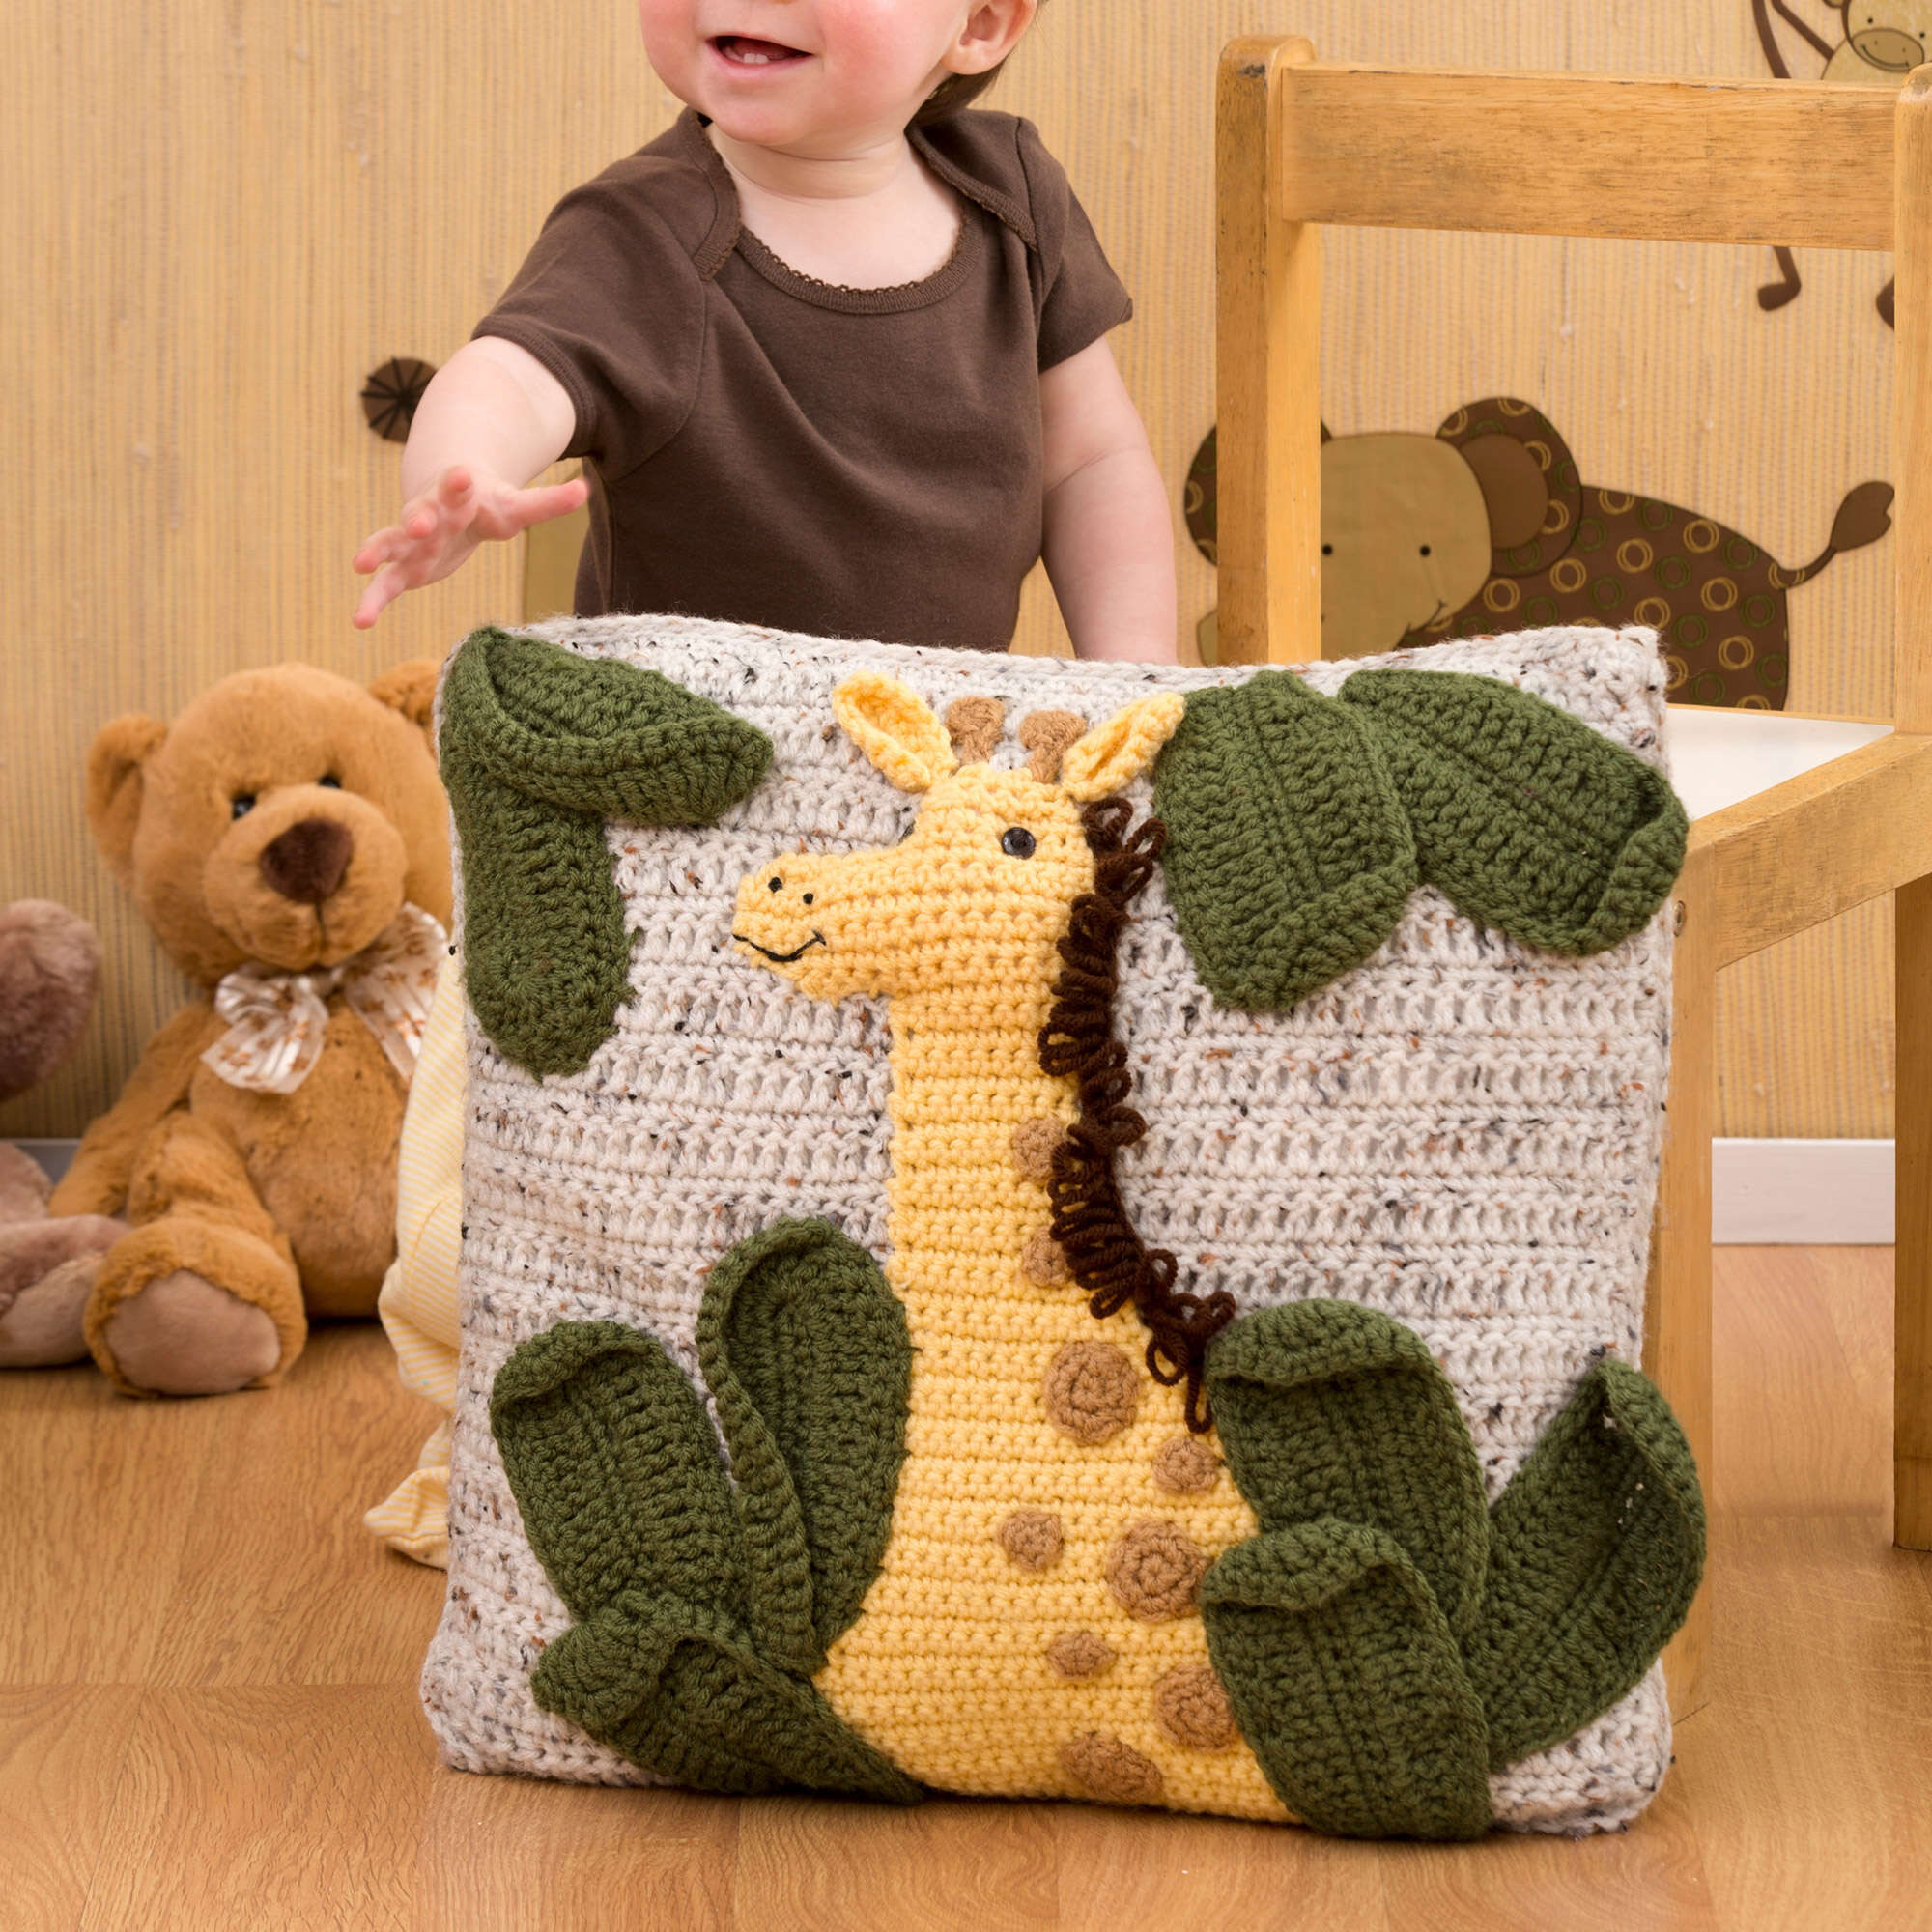 46 Free Crochet Patterns for Stuffed Animals and Loveys